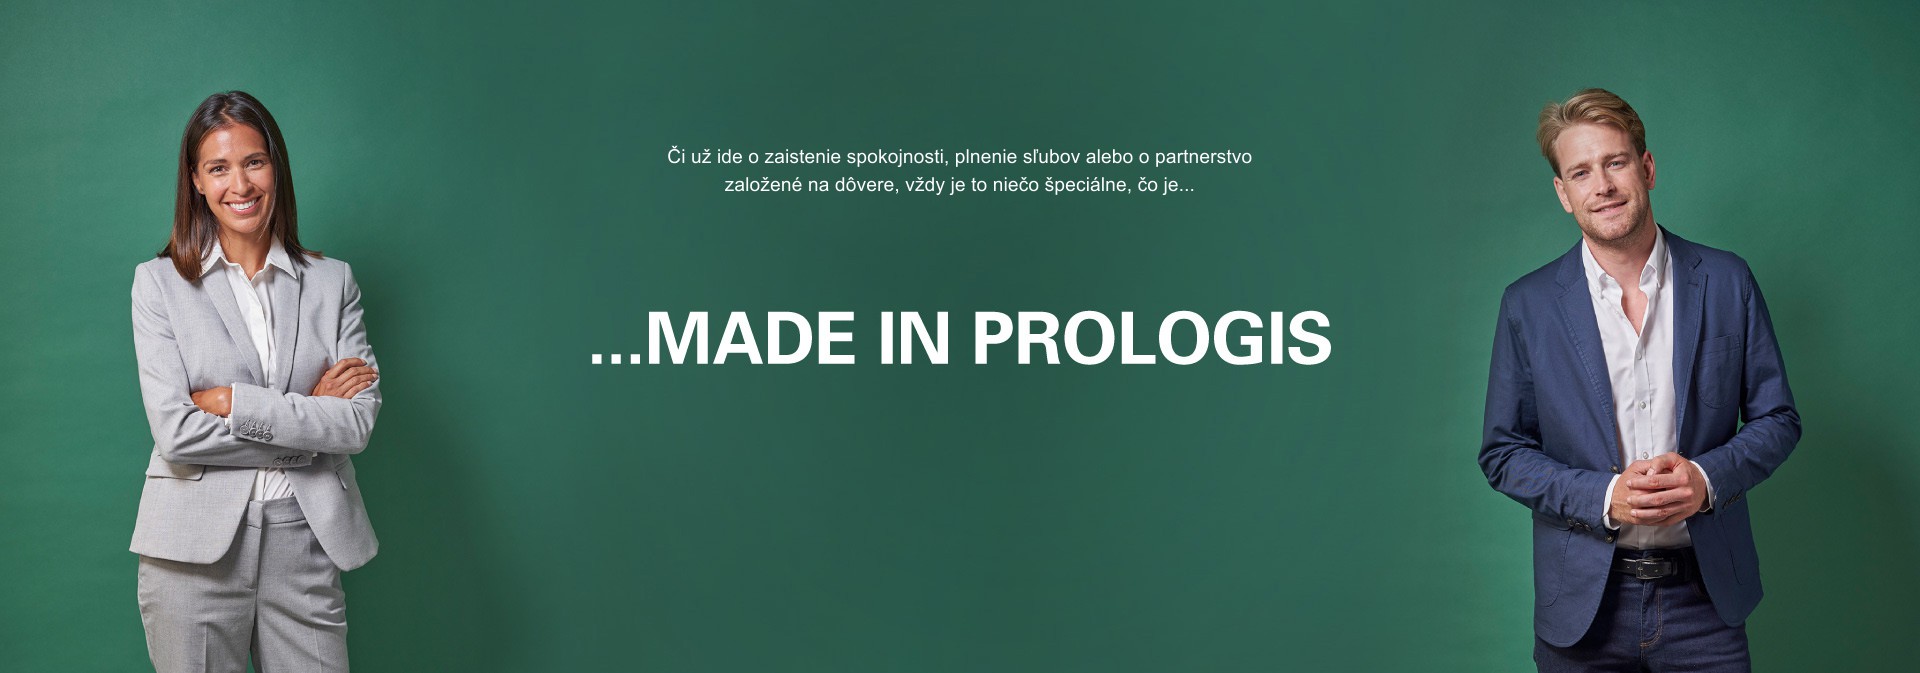 MADE IN PROLOGIS